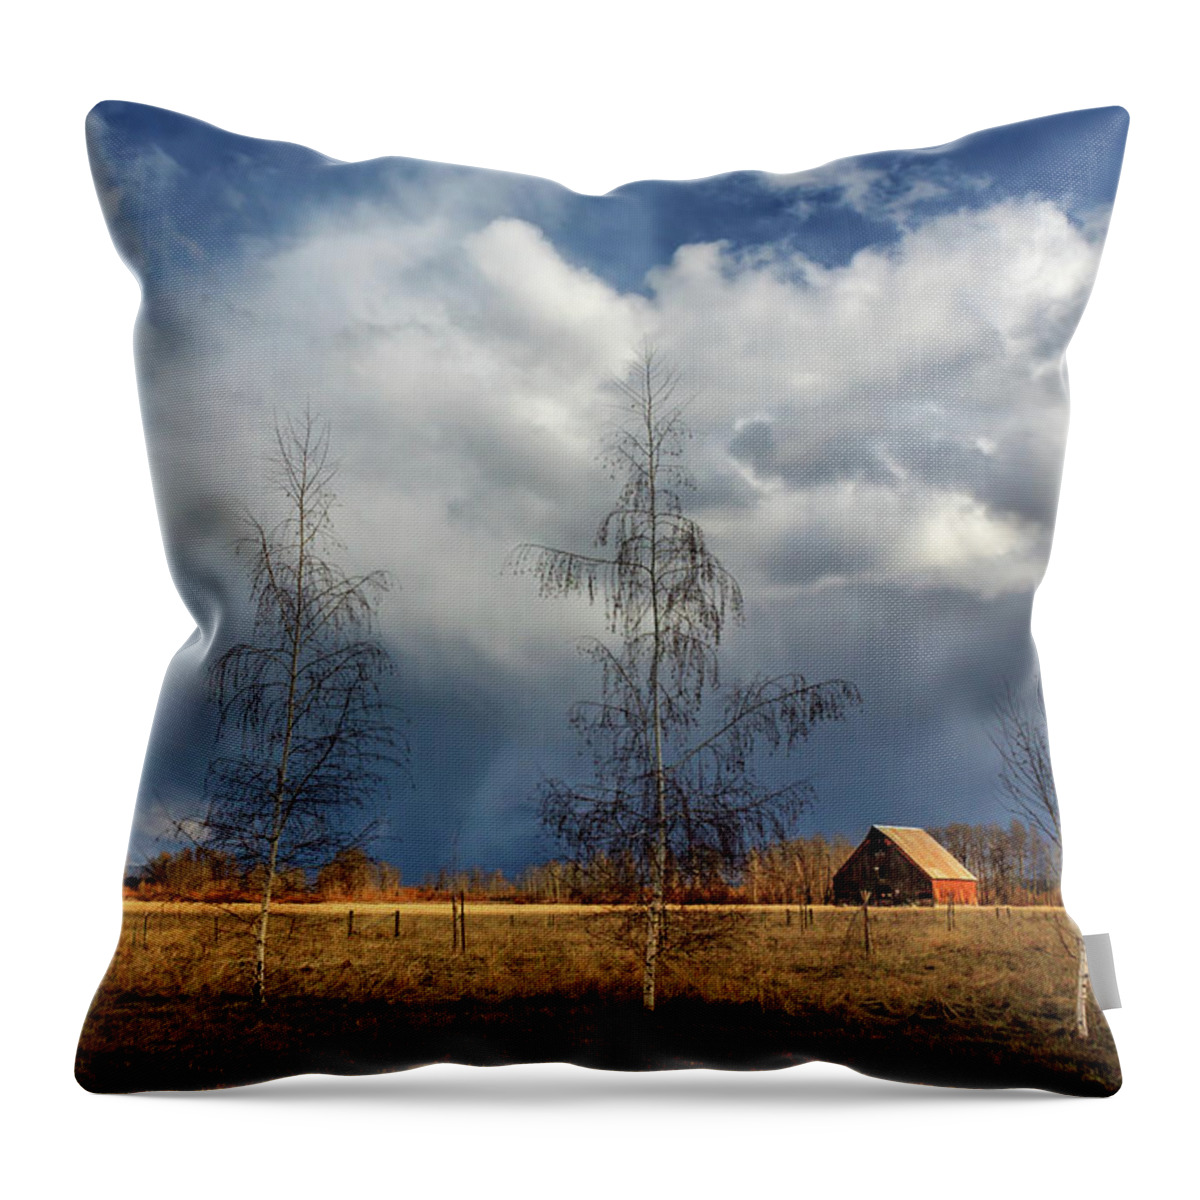 Barn Throw Pillow featuring the photograph Barn Storm by James Eddy